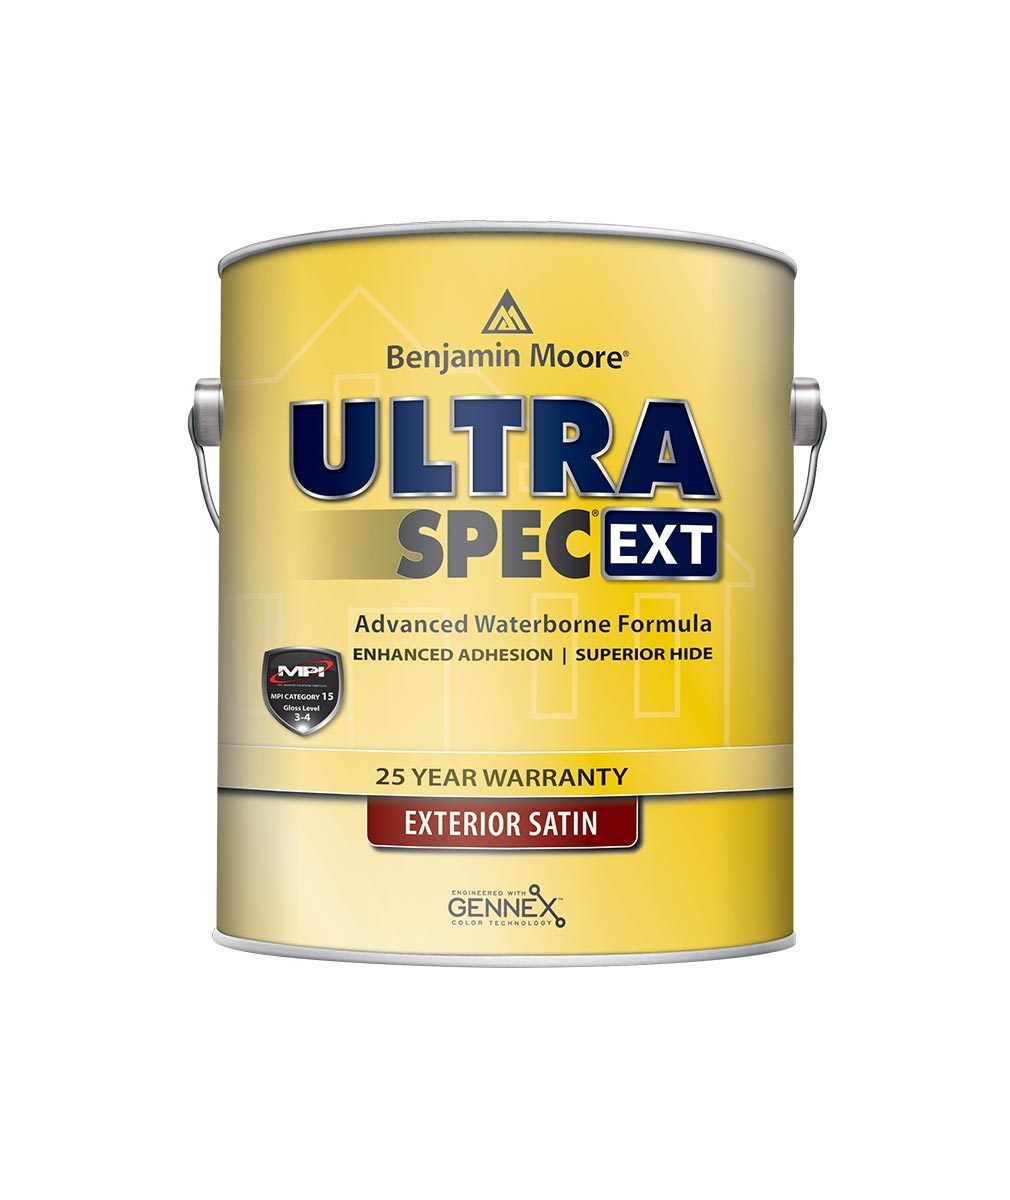 Benjamin Moore Ultra Spec EXT exterior paint in satin finish available at JC Licht